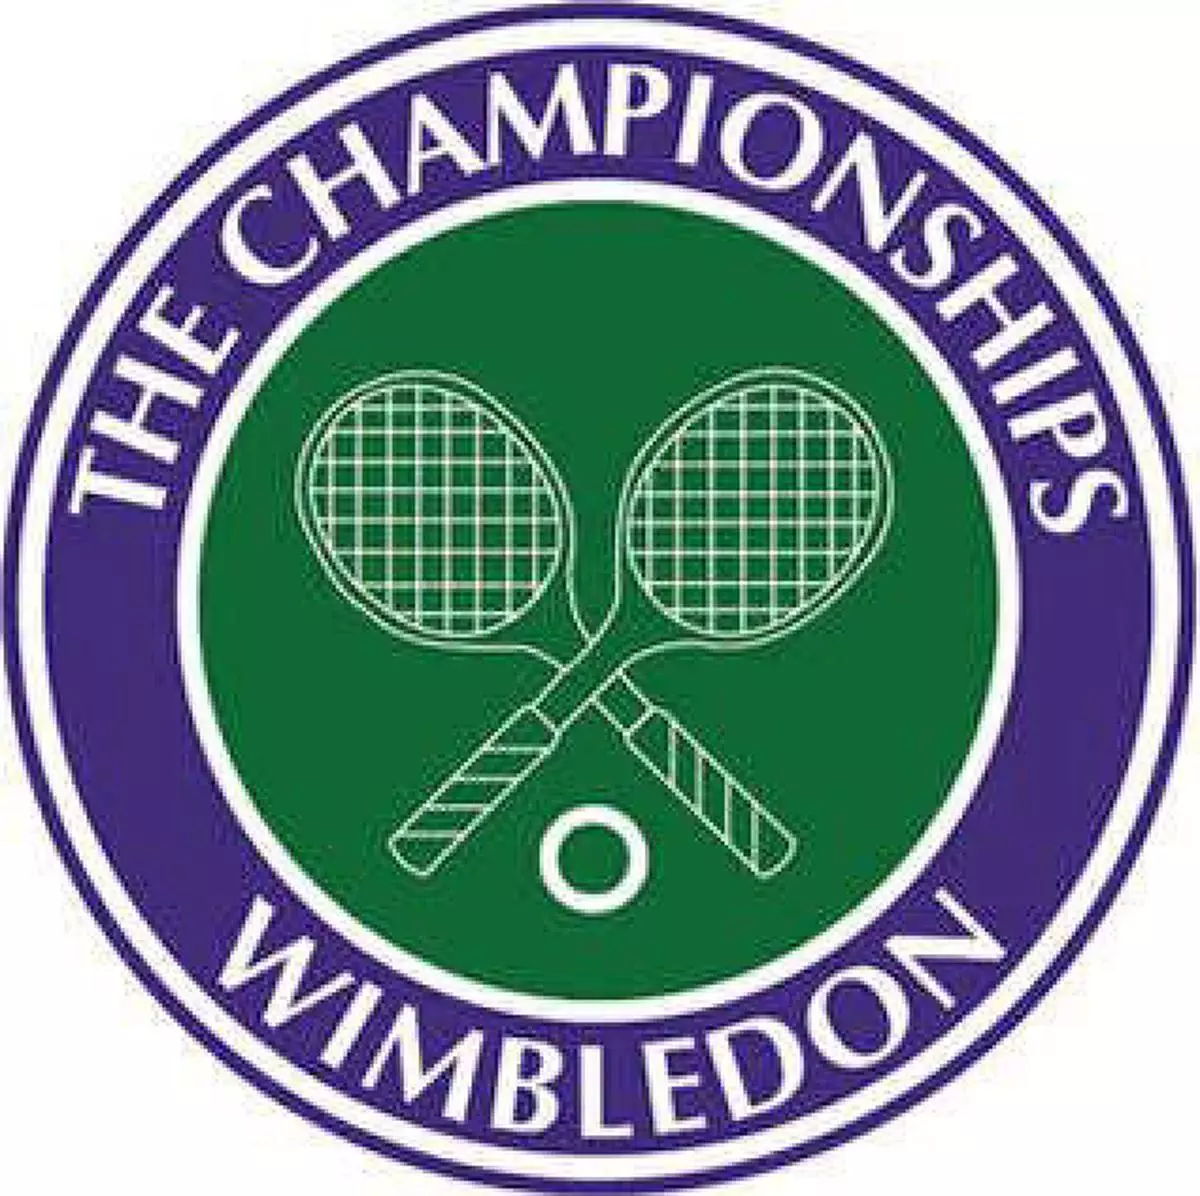 Wimbledon can be watched live on 3 channels of Star Sports